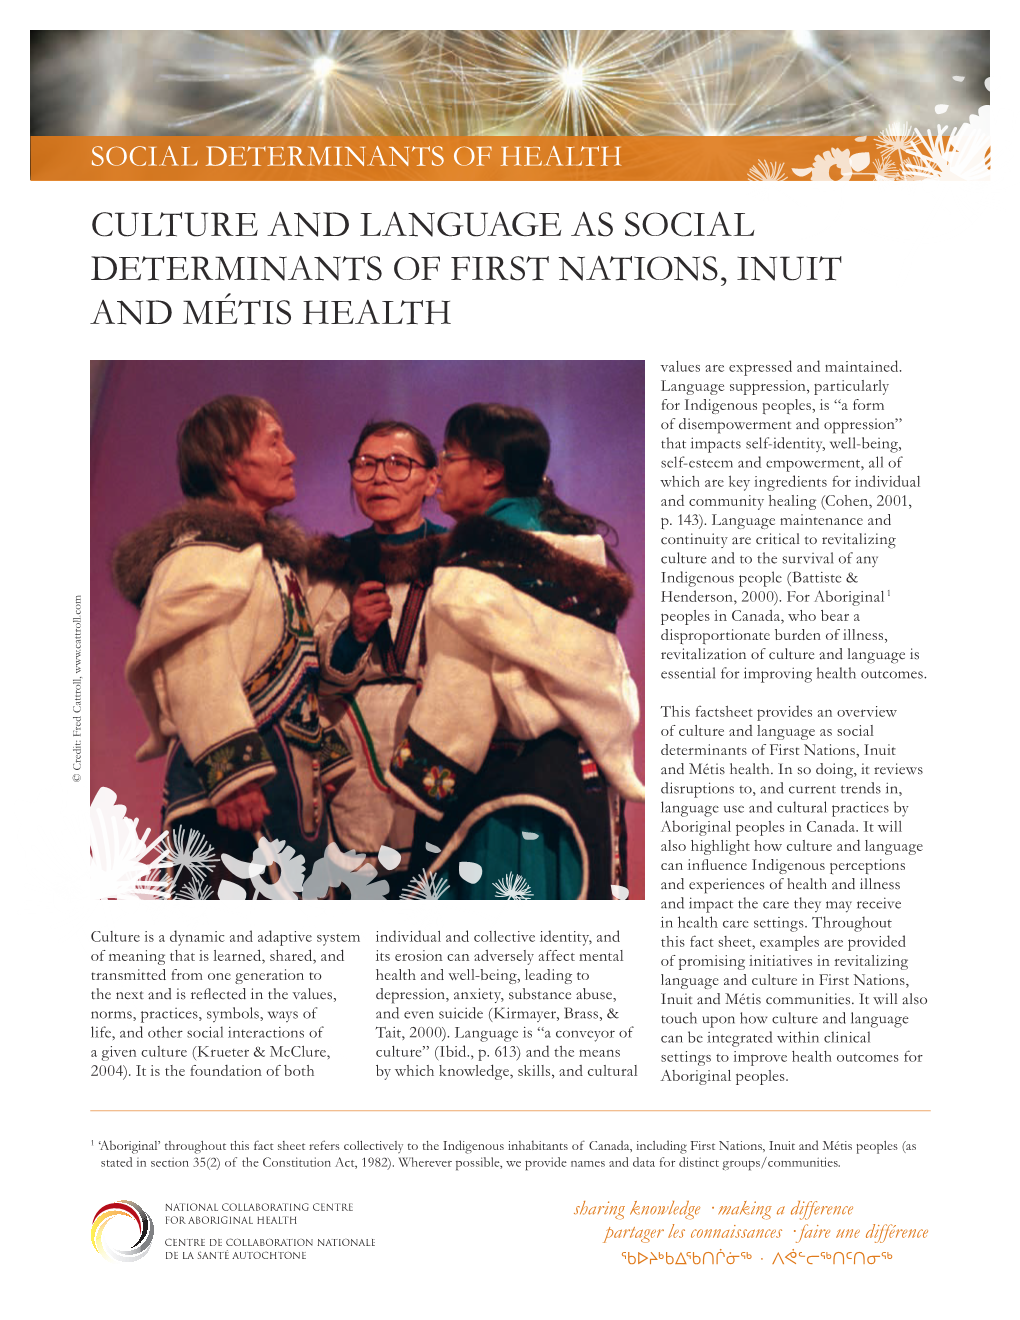 Culture and Language As Social Determinants of First Nations, Inuit and Métis Health